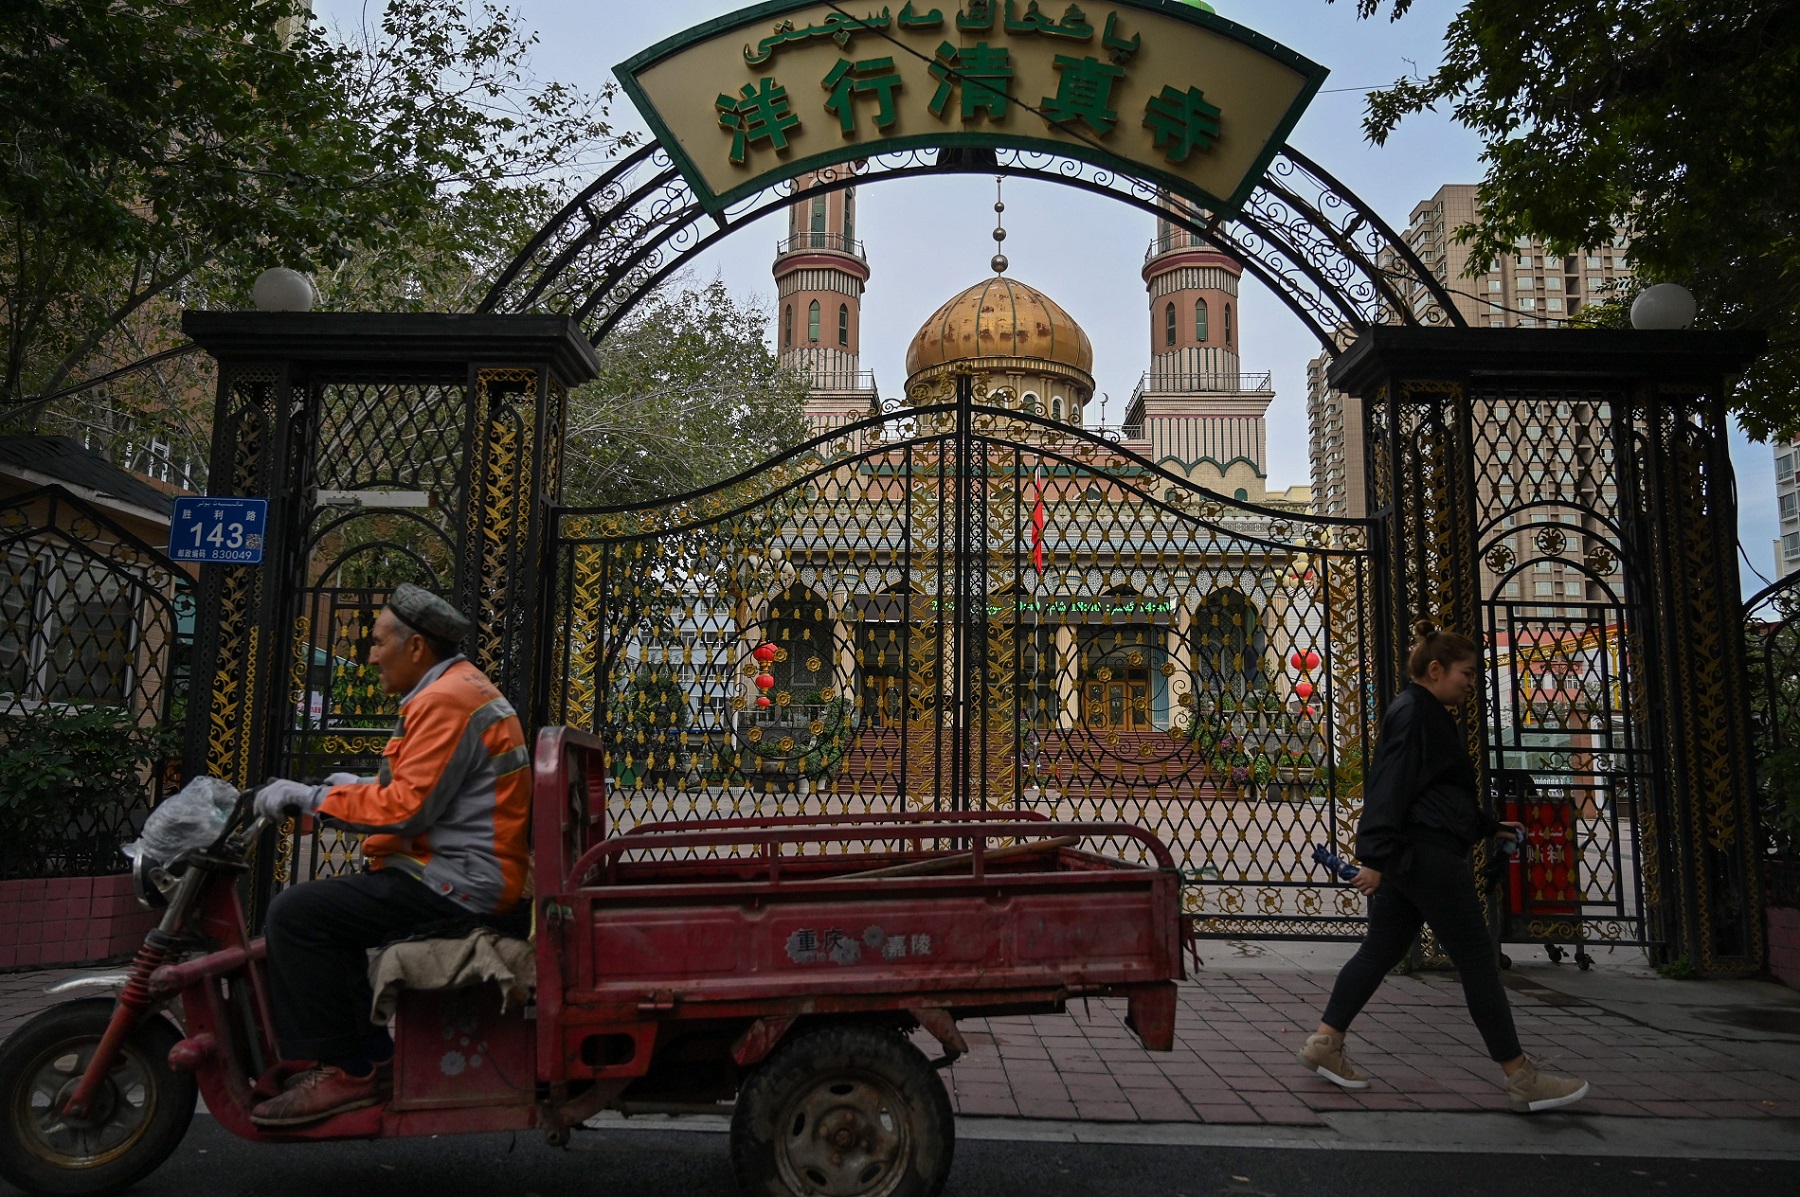 A New Round of Restrictions Further Constrains Religious Practice in Xinjiang